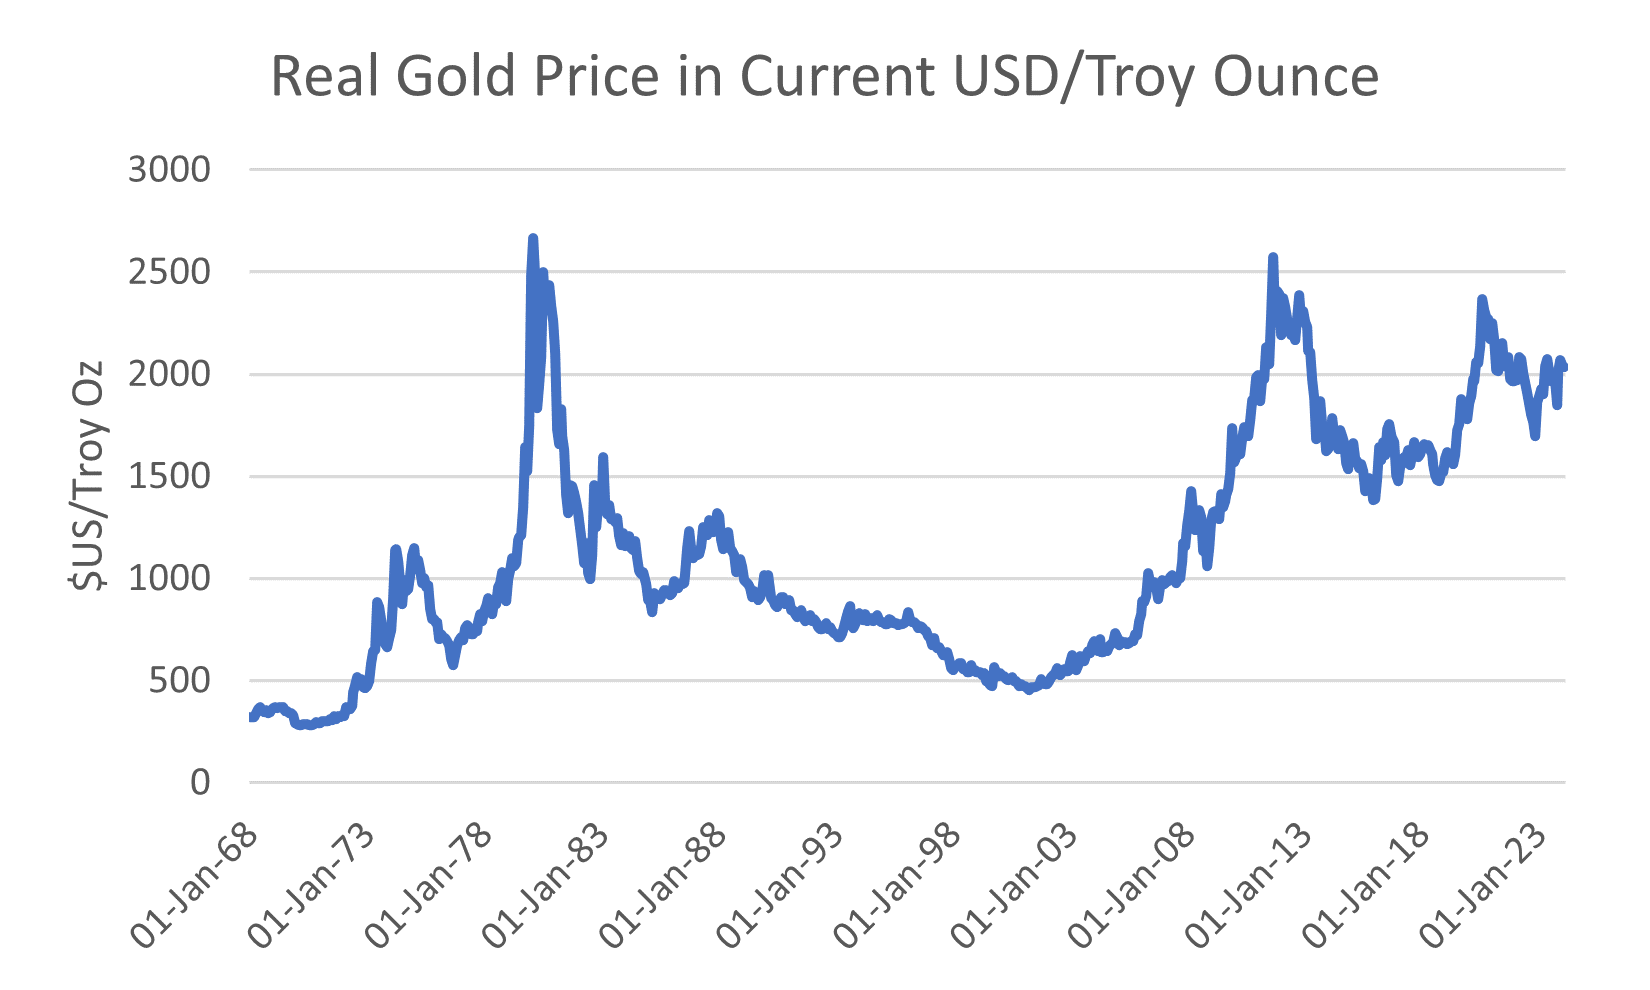 Real gold price in current USD deflated by the US Consumer Price Index (CPI). Source: LSEG Datastream.